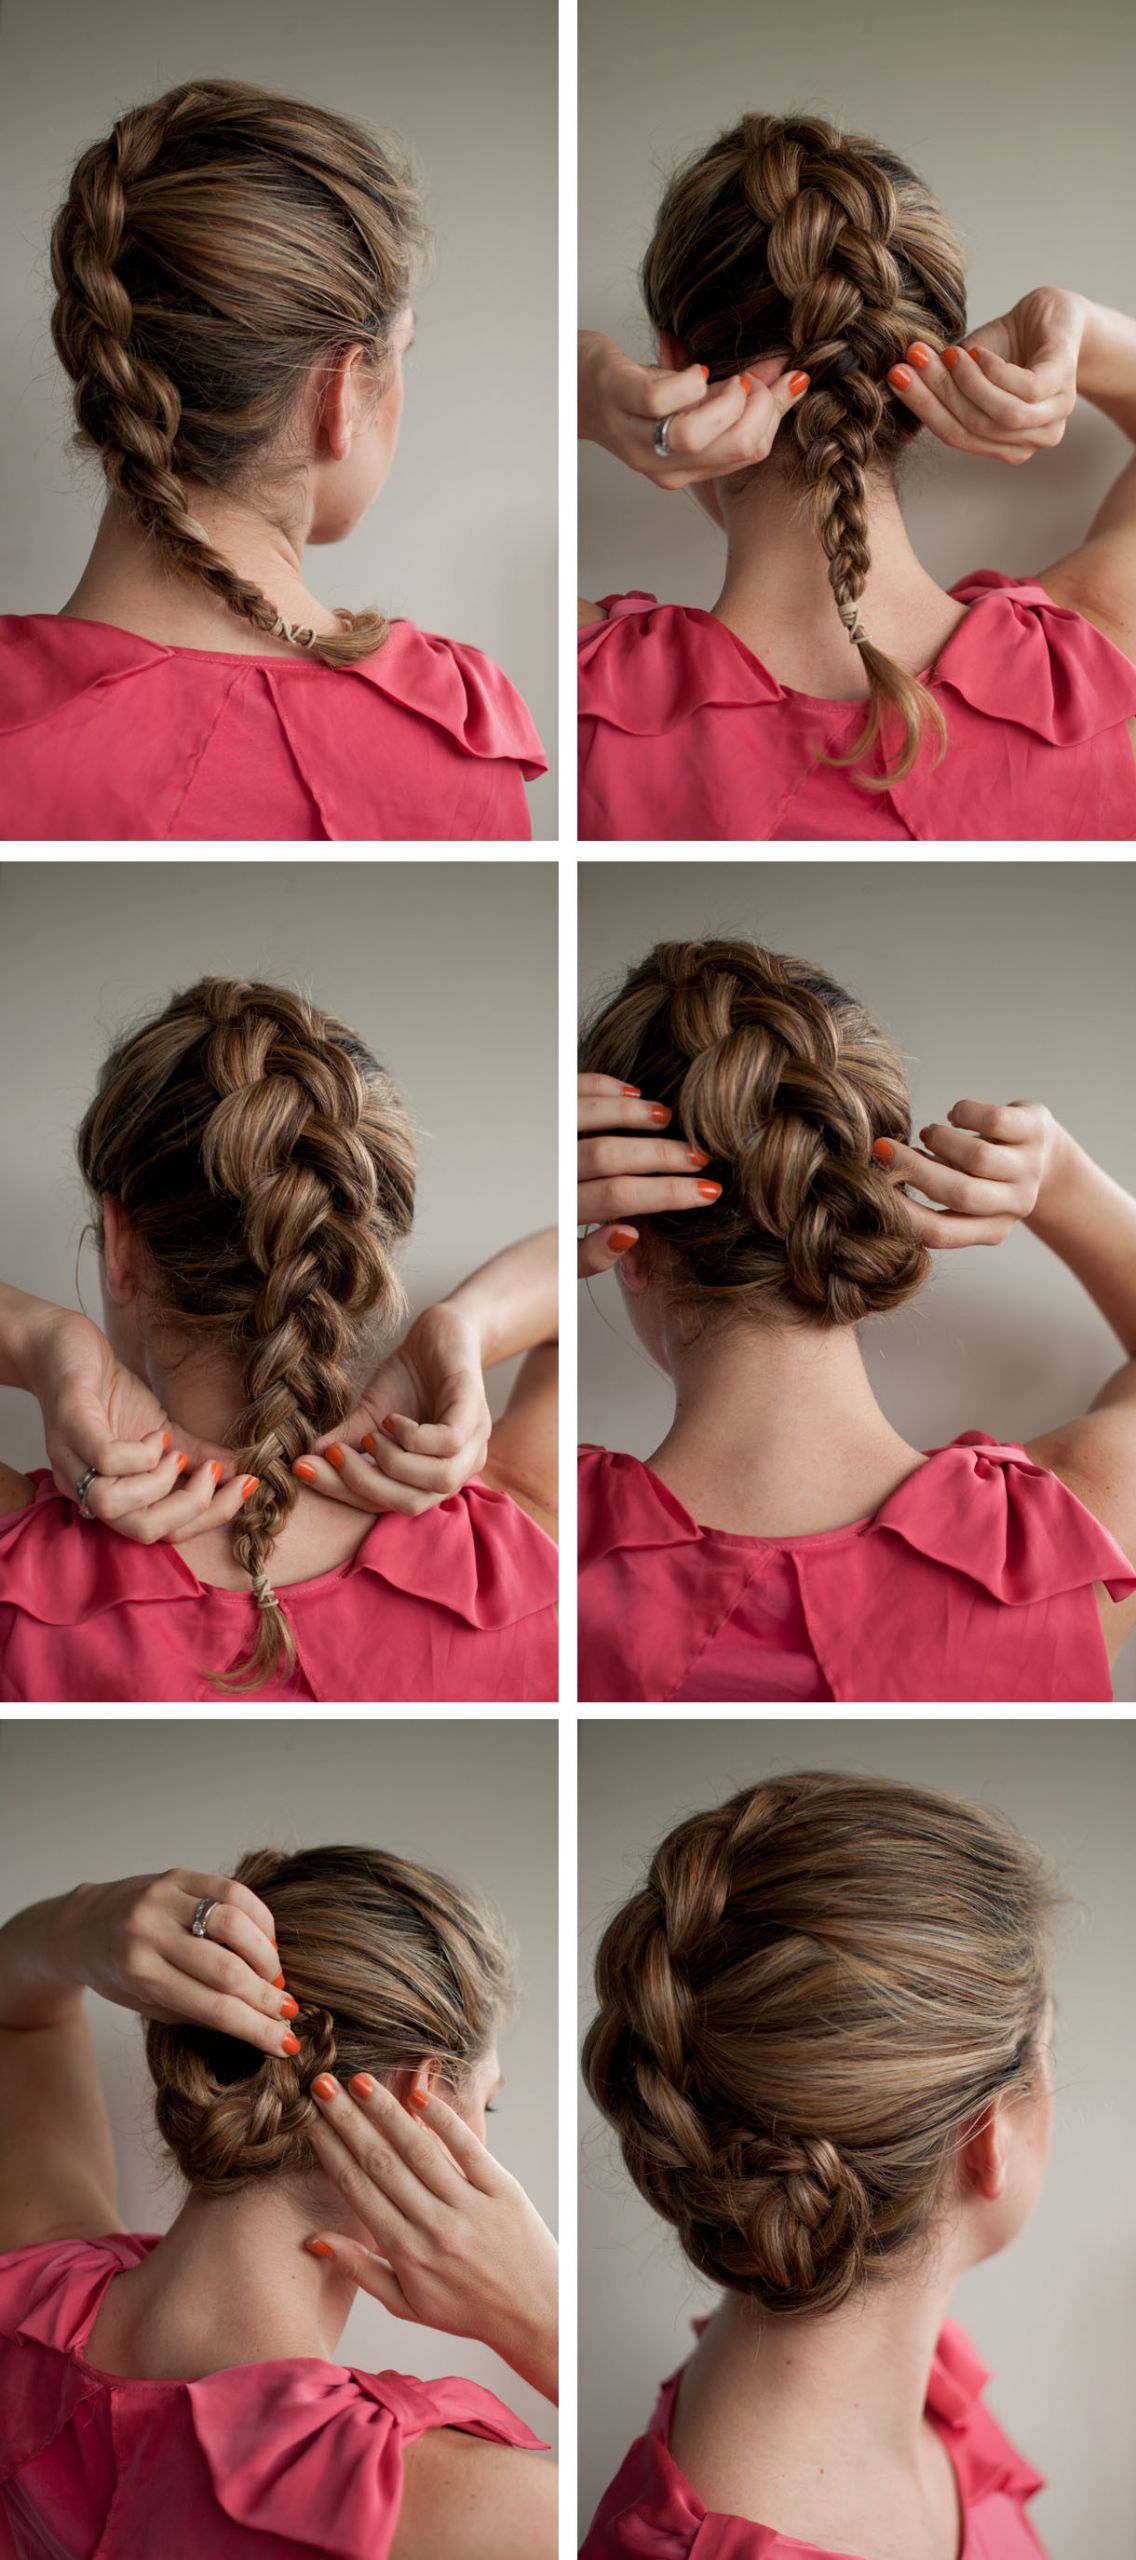 Easy Hairstyles To Do Yourself
 Braided upstyle Hair Romance on Latest Hairstyles Hair